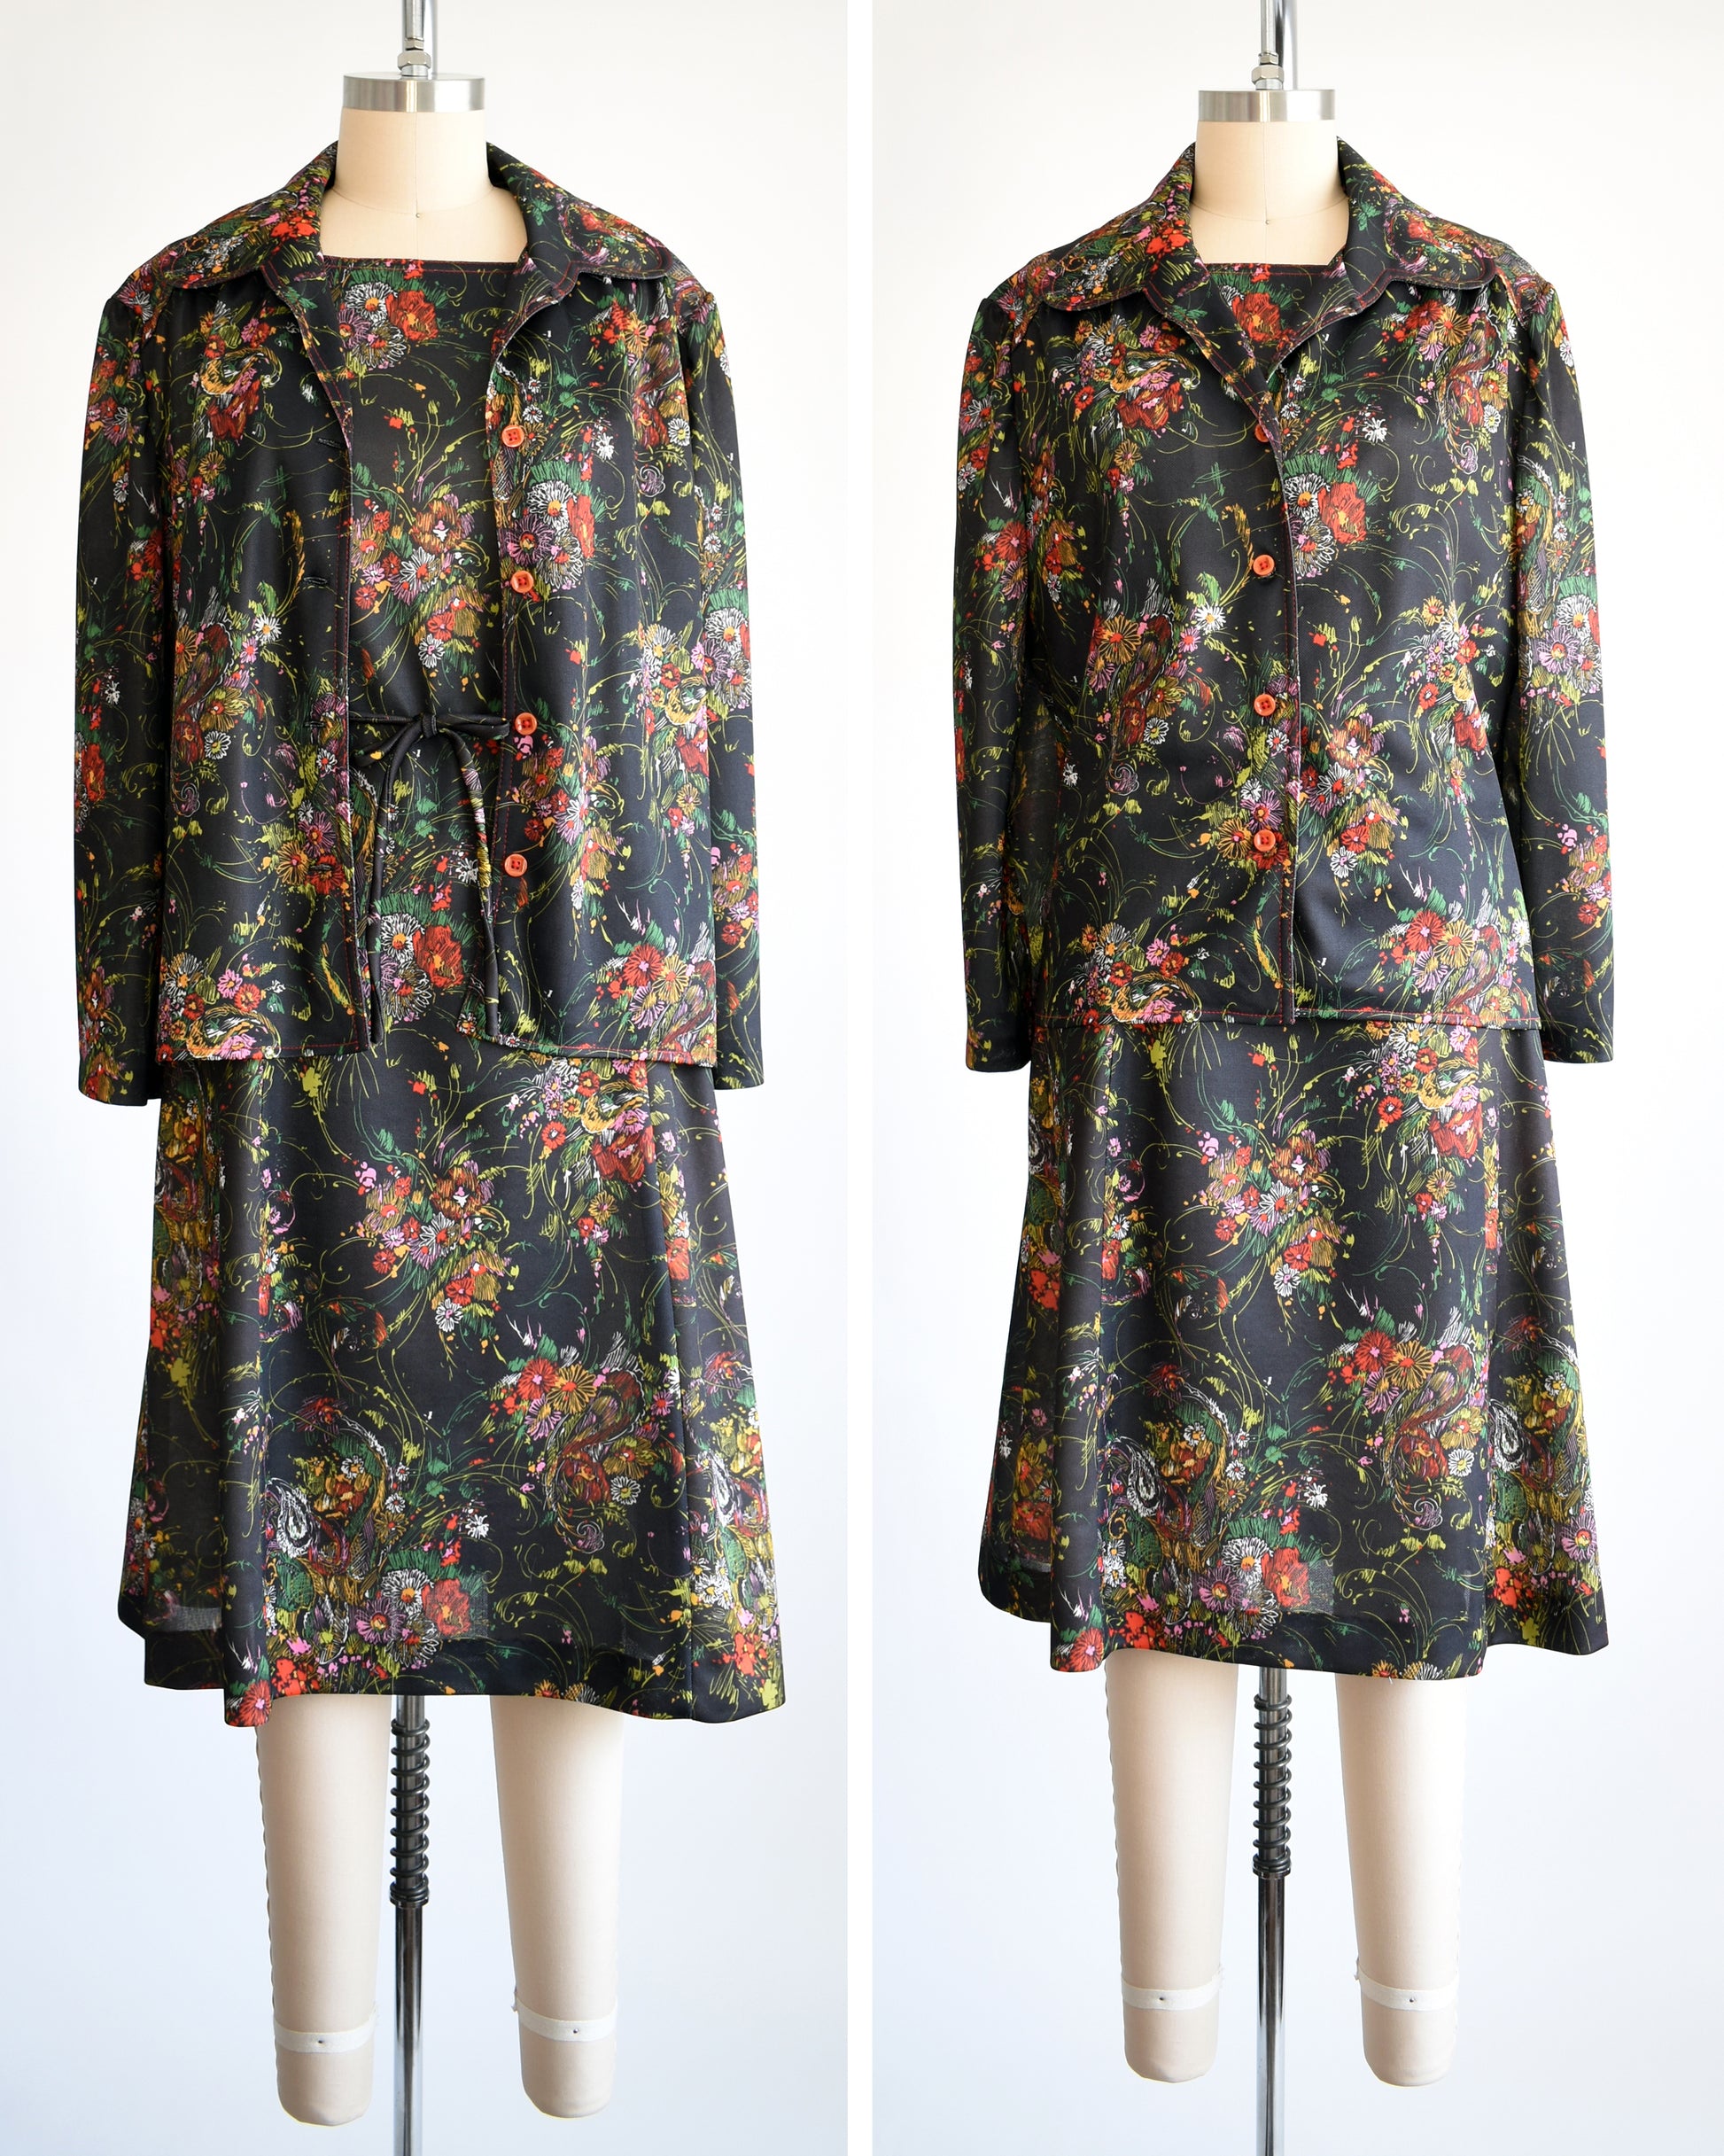 side by side front views of a vintage 1970s black floral dress set that comes with a dress, a matching top, and belt. the left the top is unbuttoned and the right shows the top buttoned